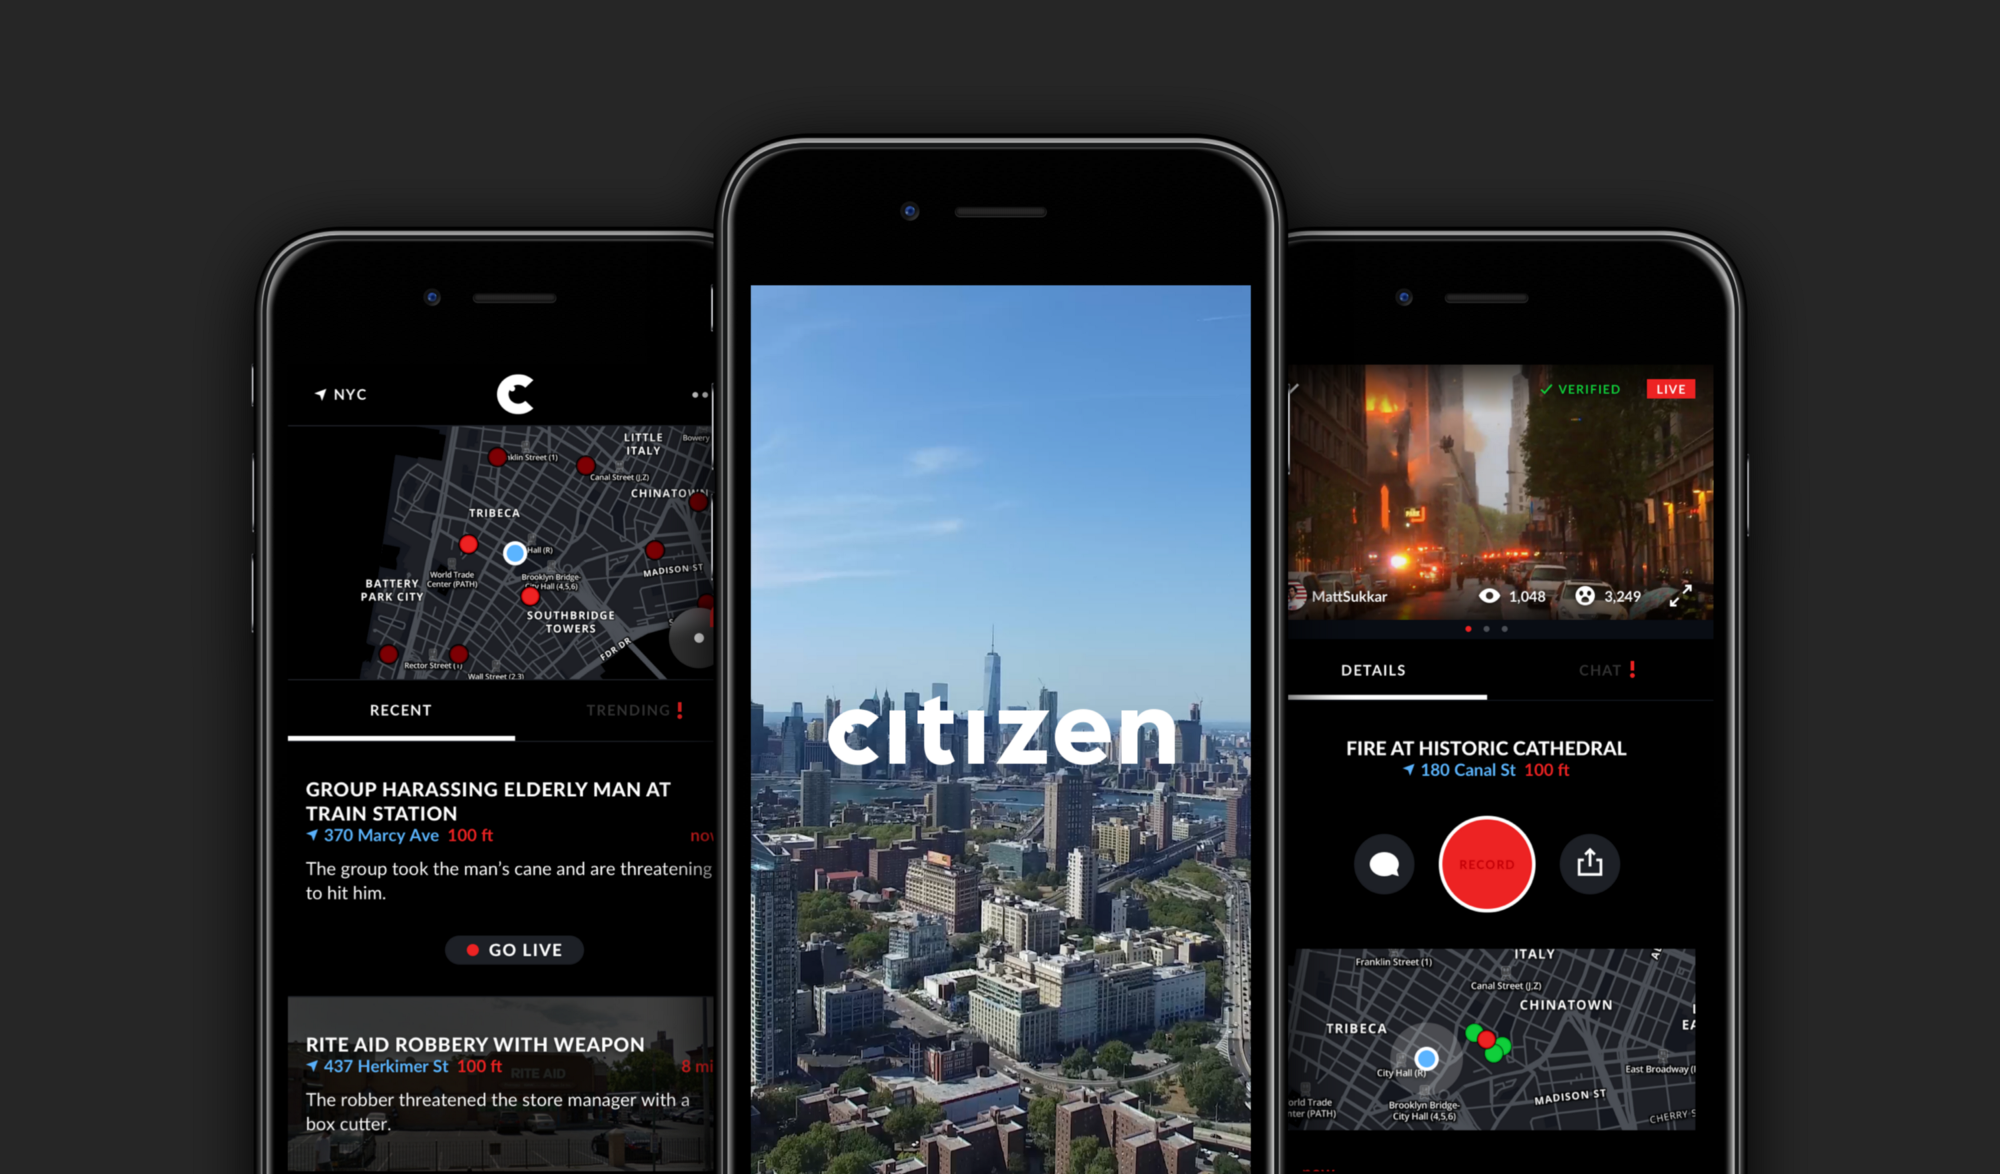 Banned crime reporting app Vigilante returns as Citizen, says its 'report incident' feature will be pulled